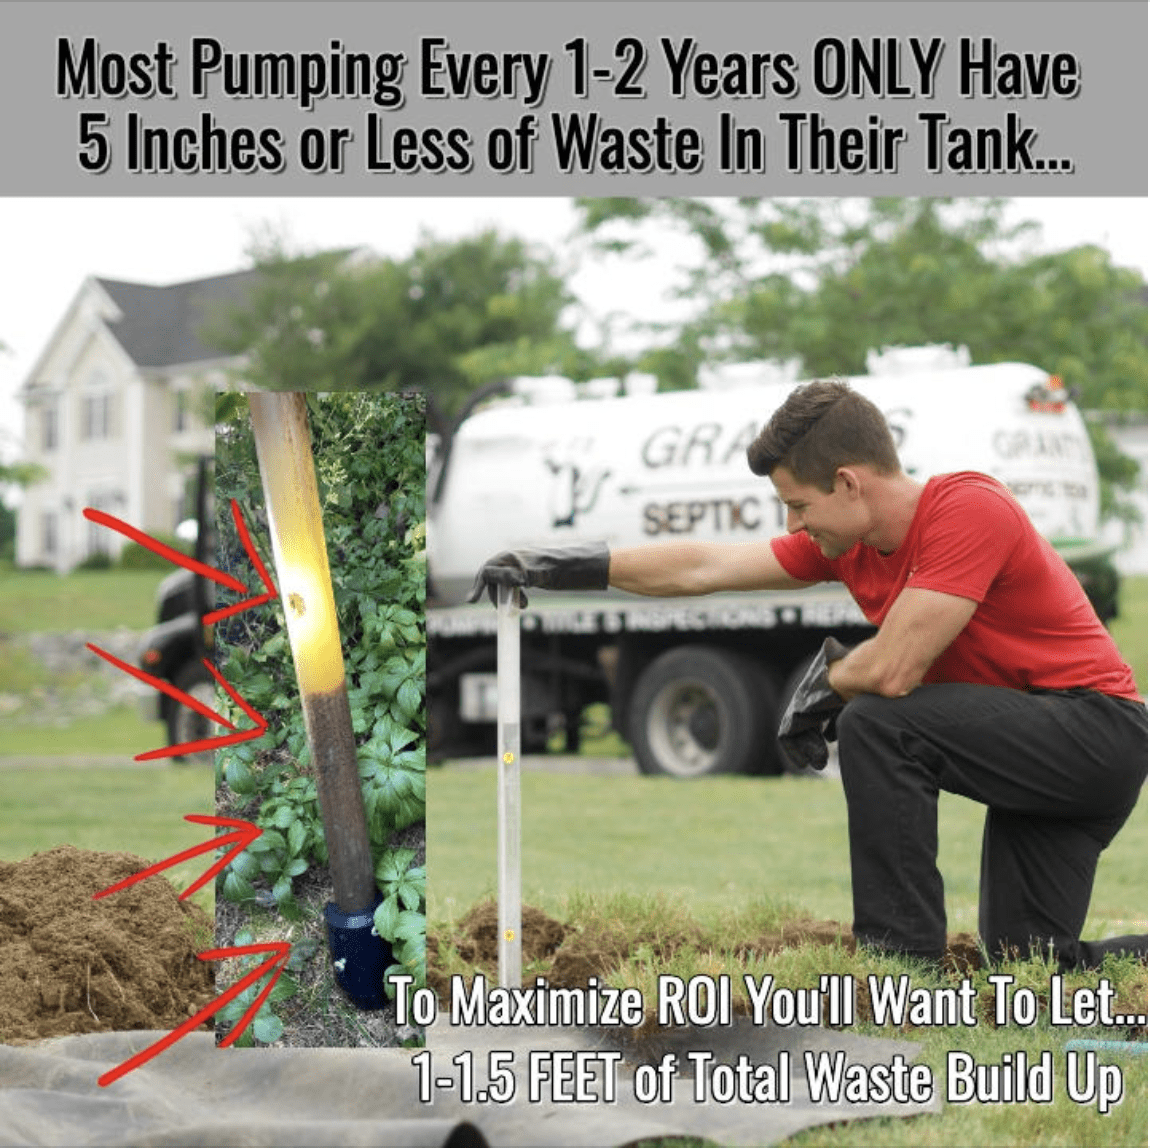 How often should a Septic Tank be pumped out?